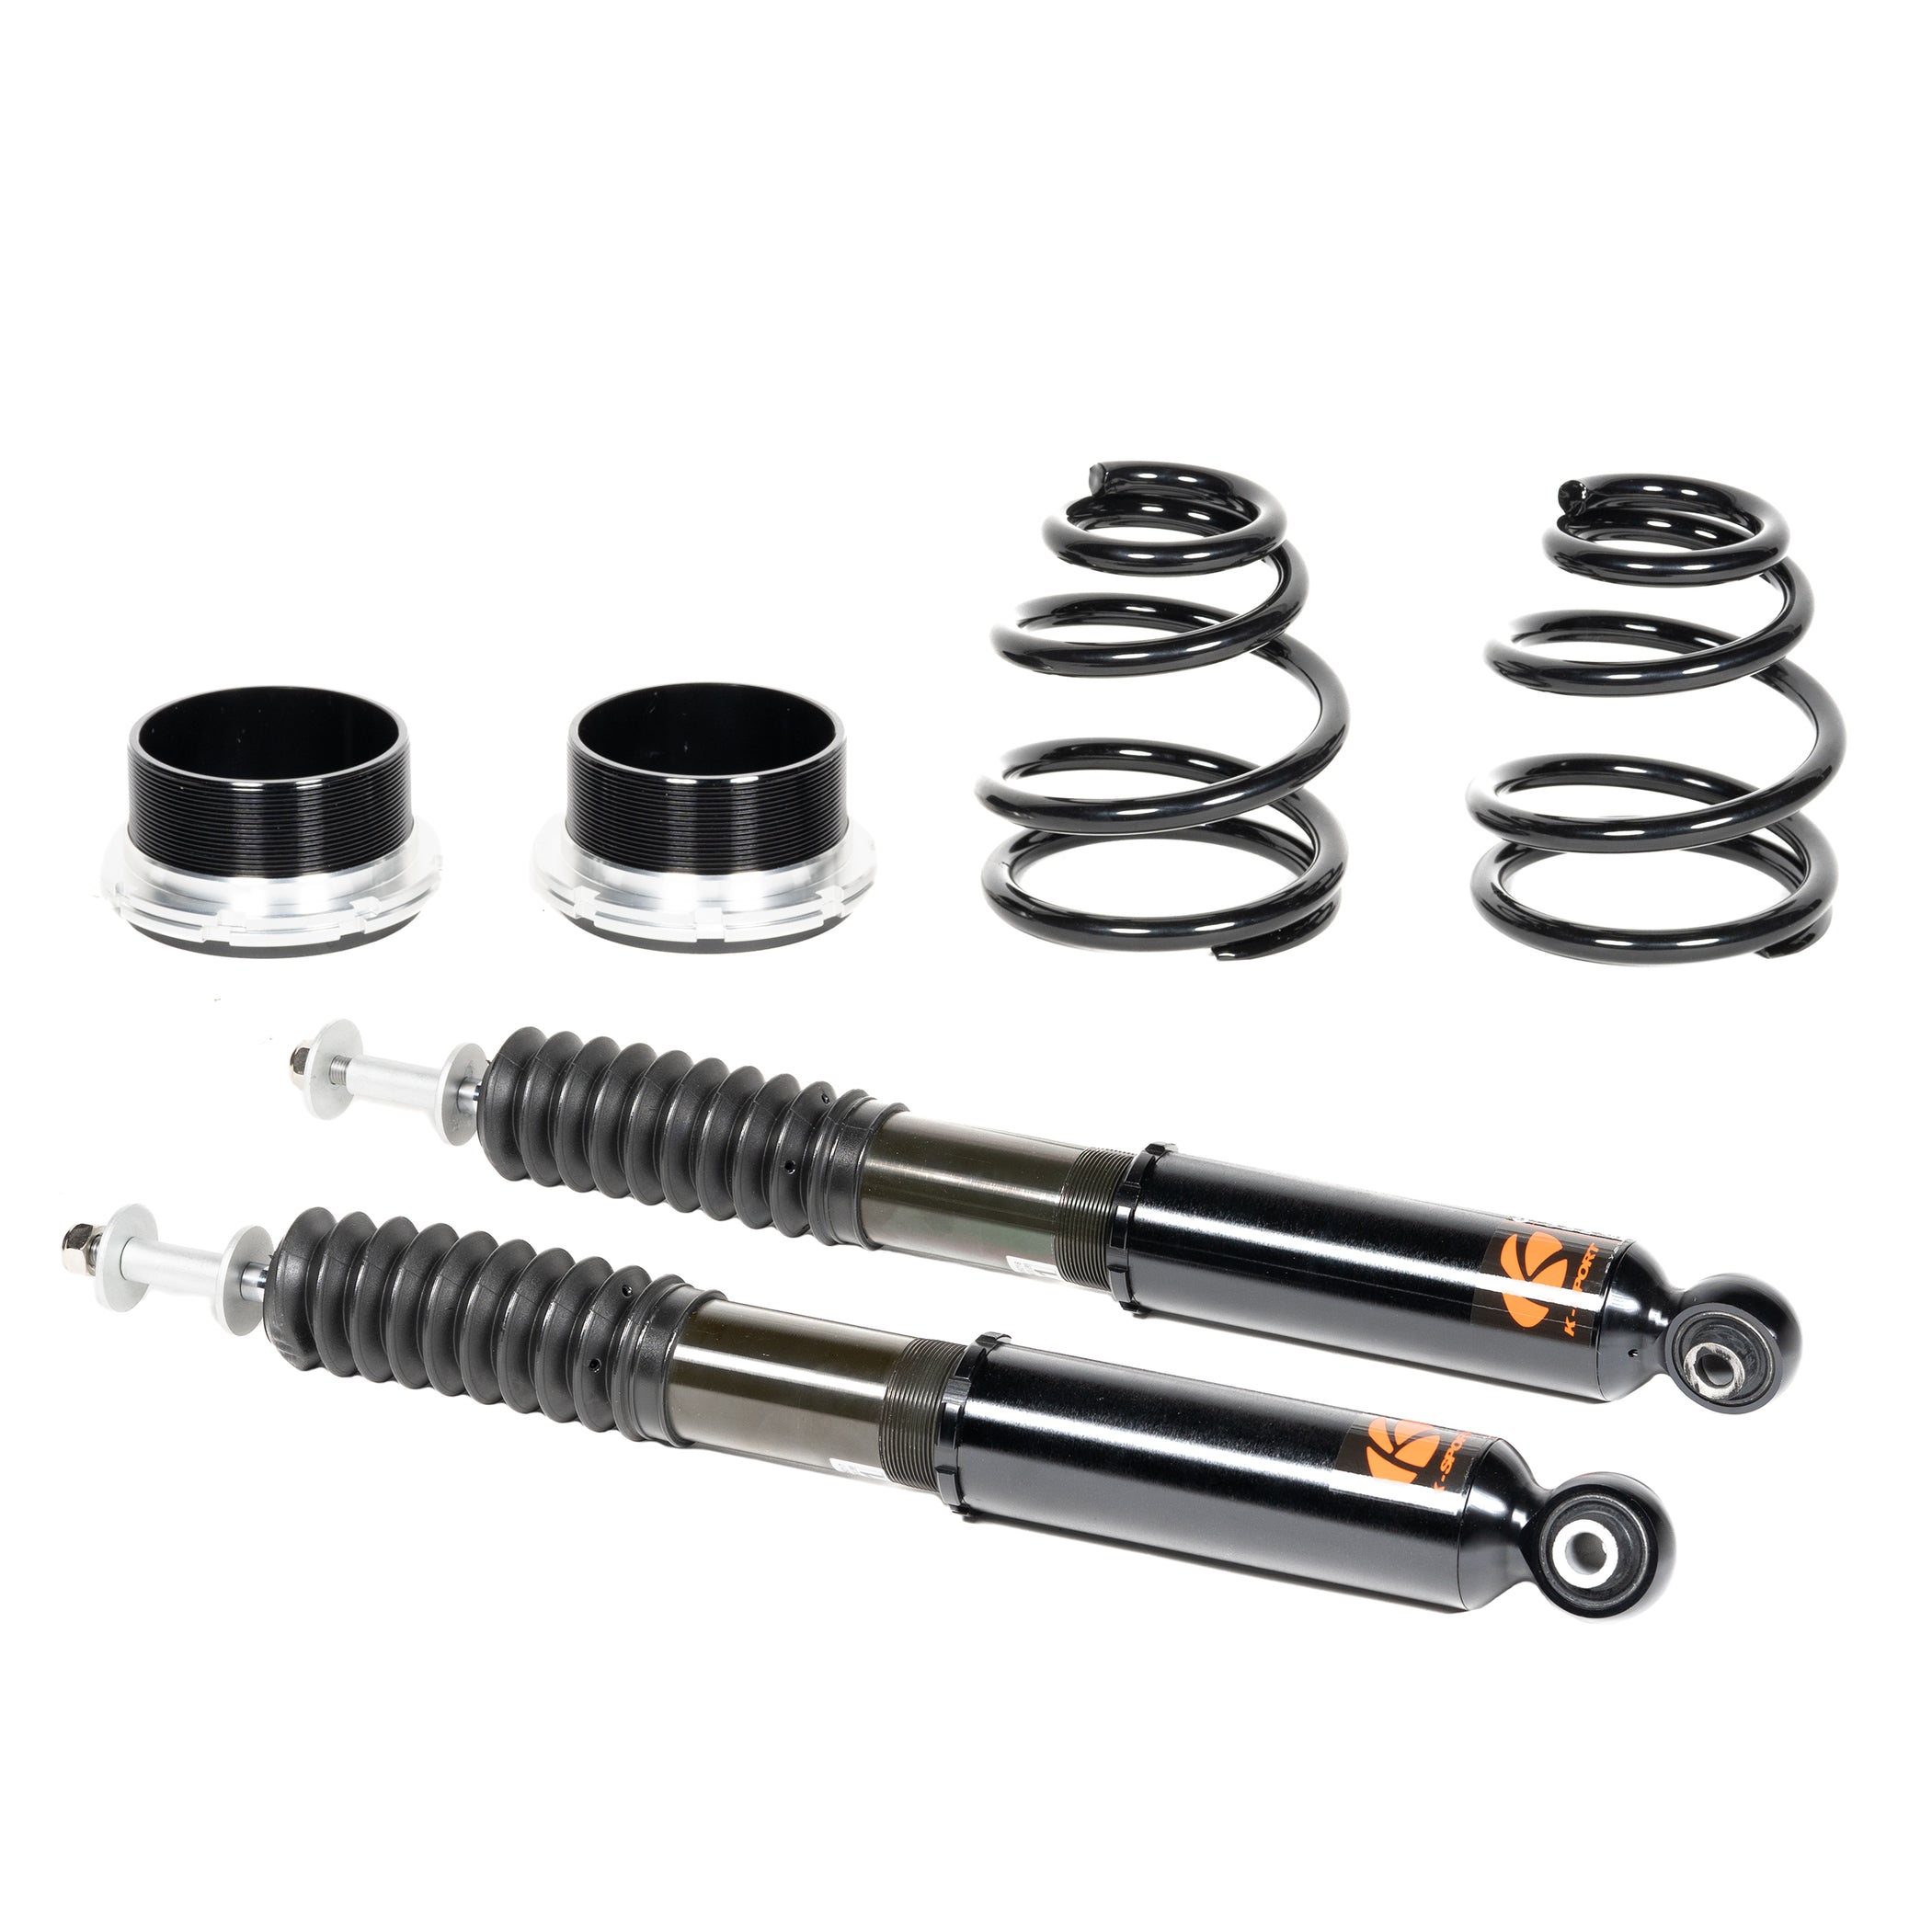 20132018 Ford Fusion (Fwd/Awd) Ksport USA Coilovers